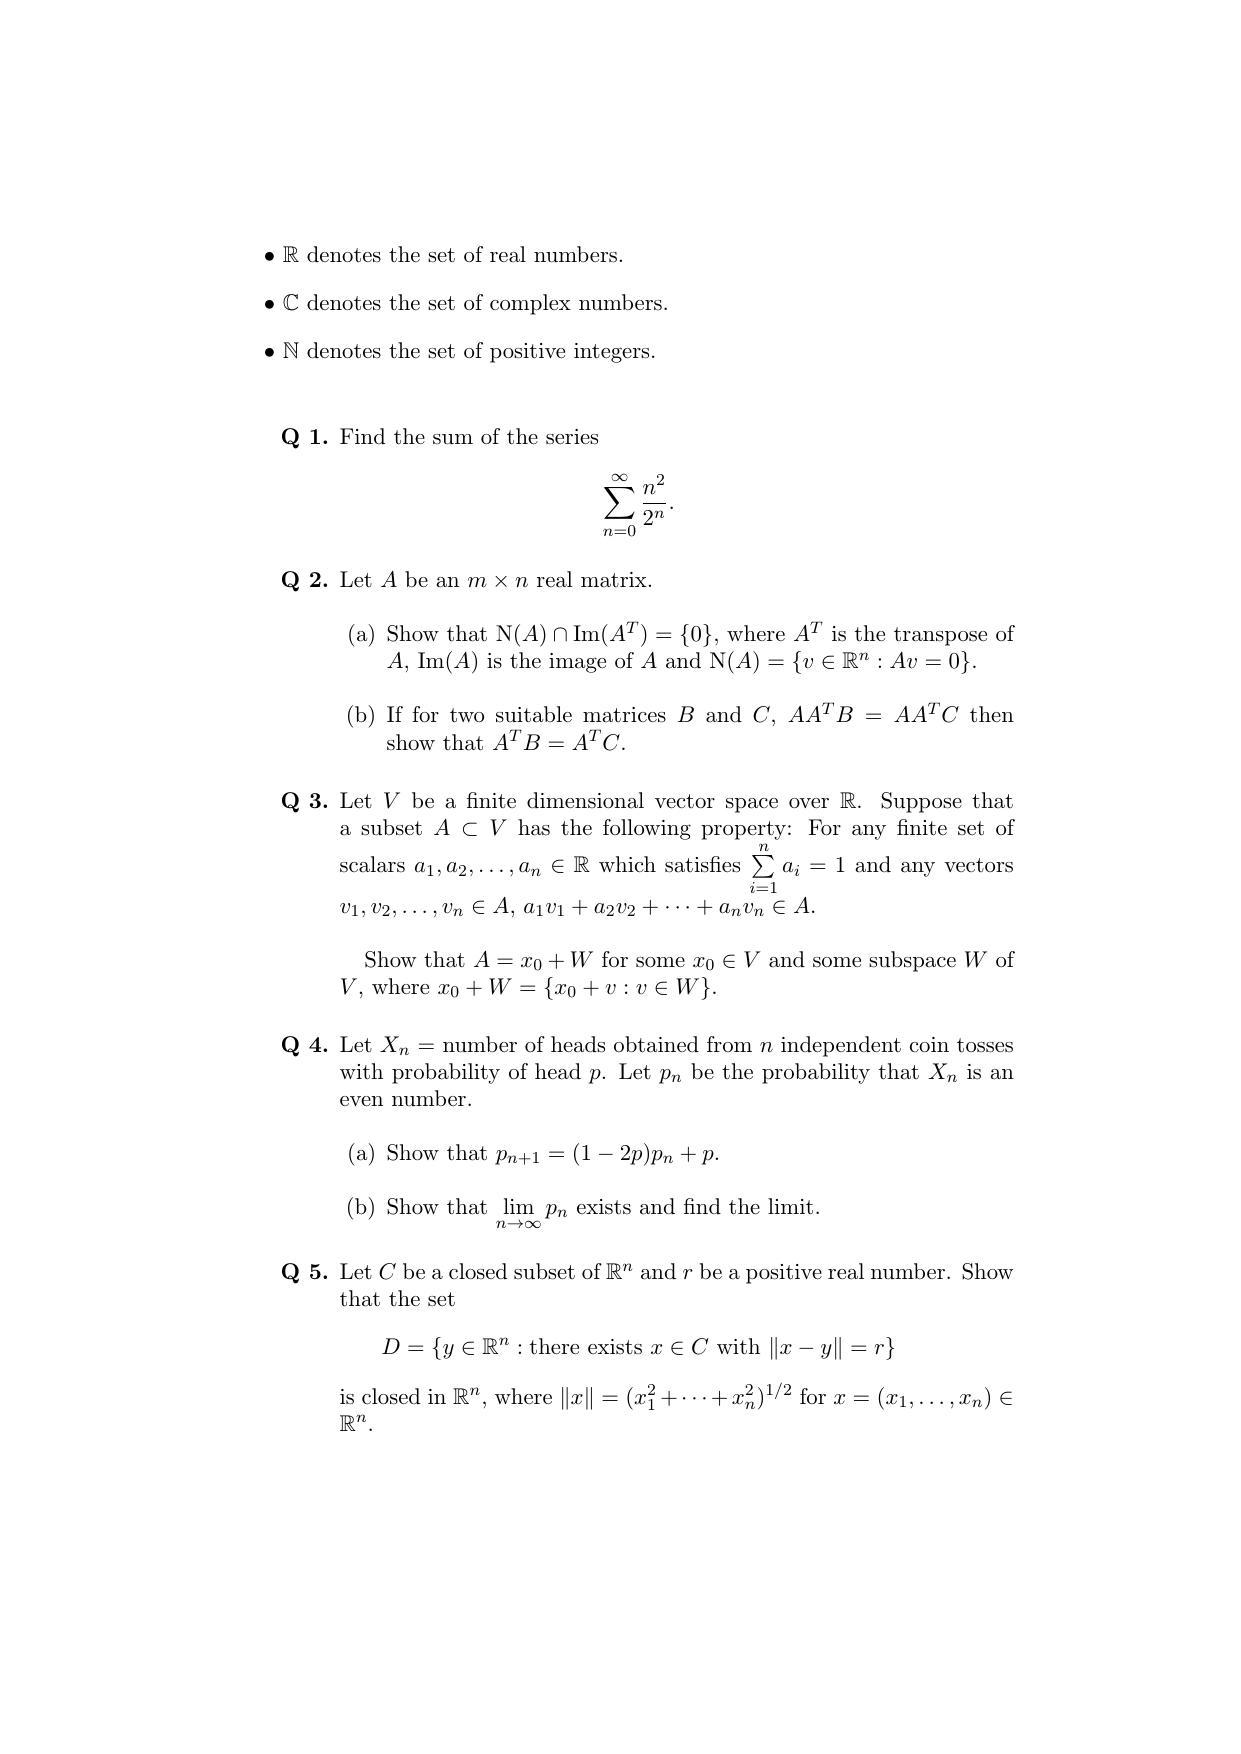 ISI Admission Test JRF in Mathematics MTA 2015 Sample Paper - Page 1